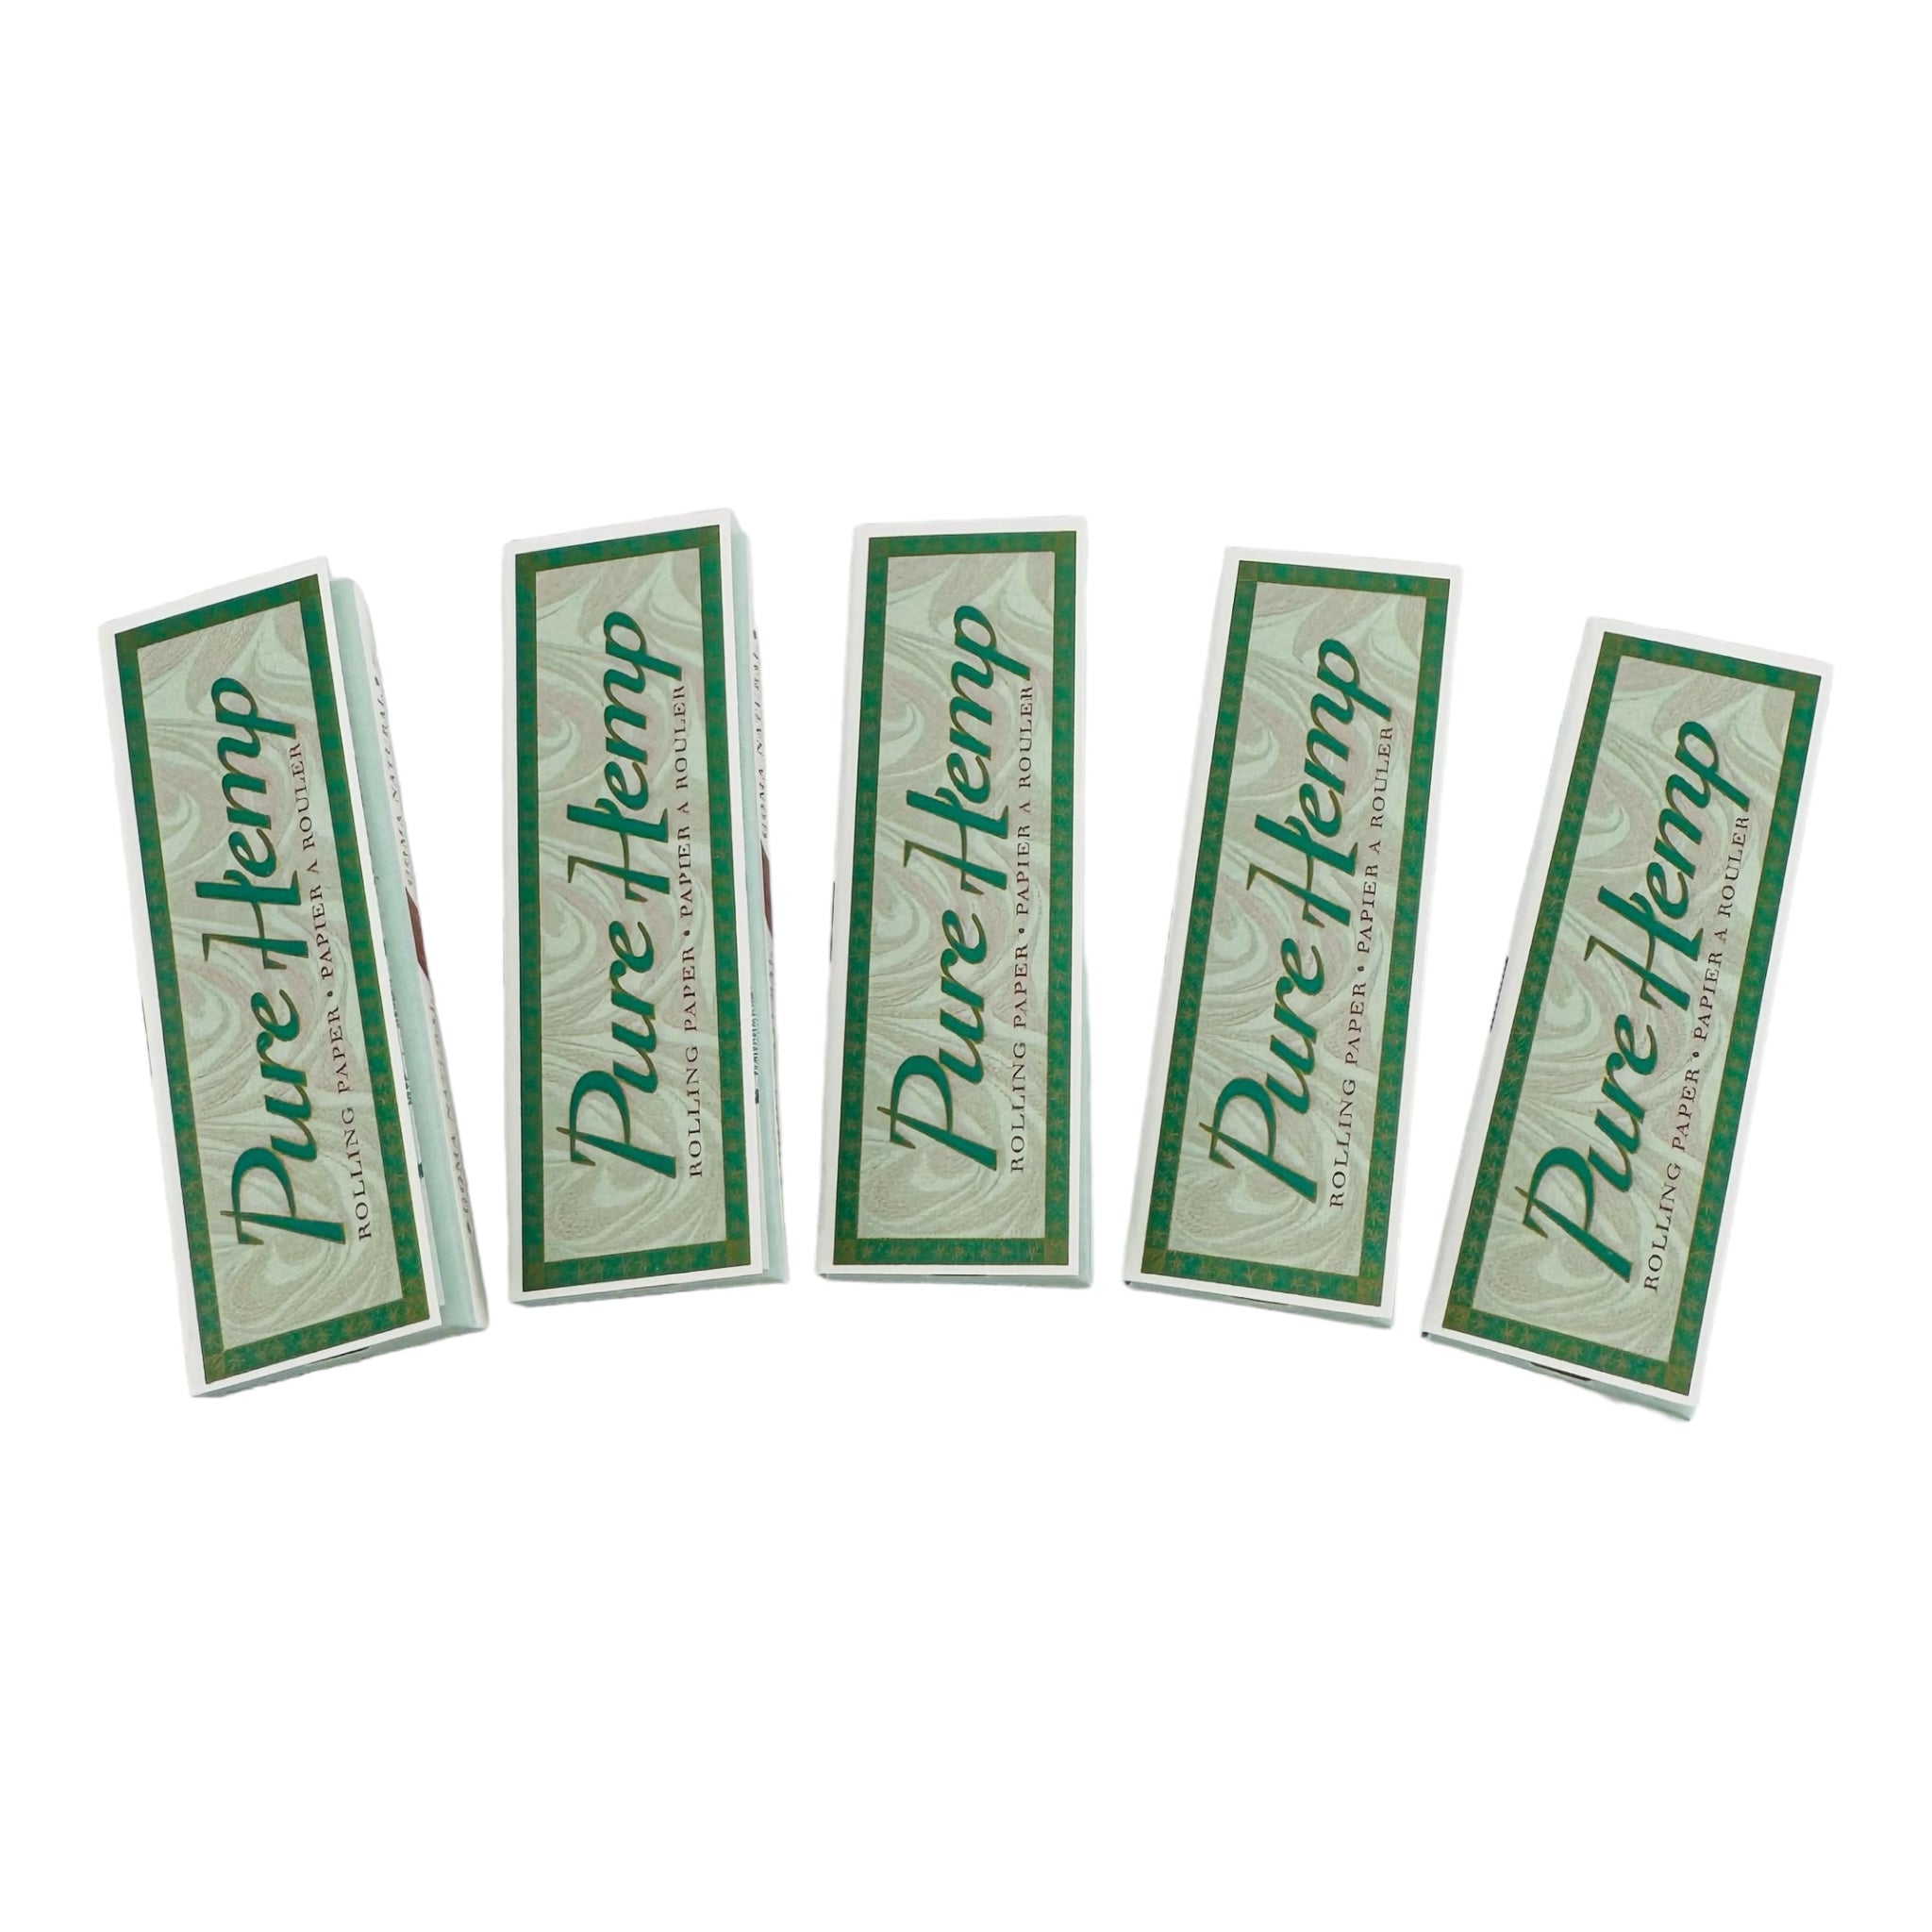 Pure Hemp 1-1/4" Rolling Papers - 5 Packs